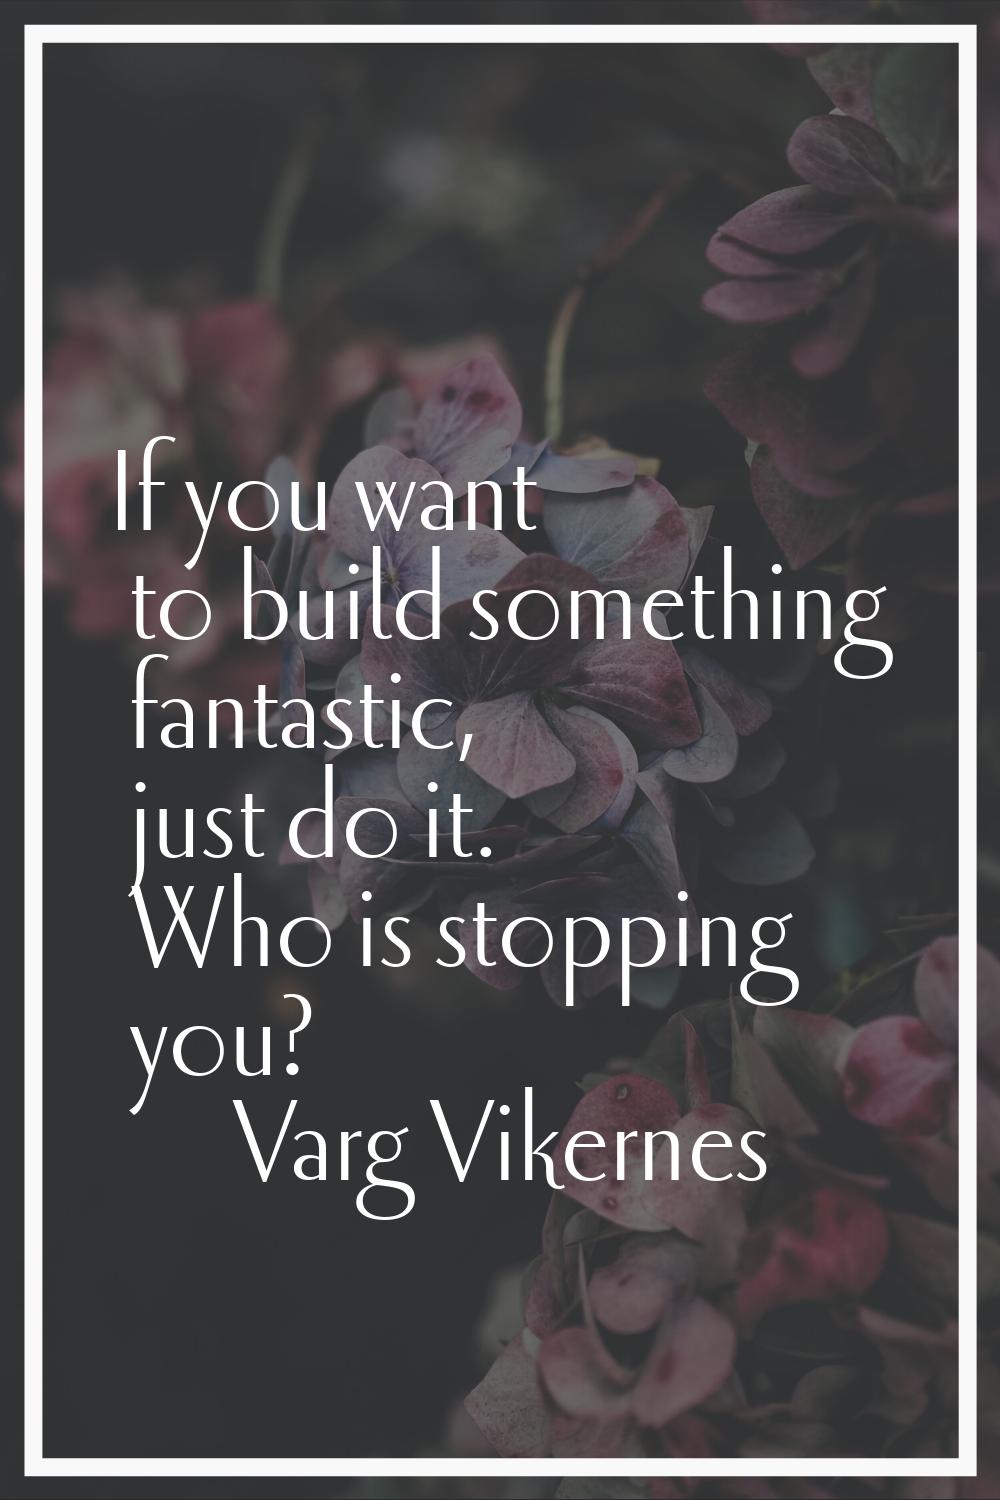 If you want to build something fantastic, just do it. Who is stopping you?